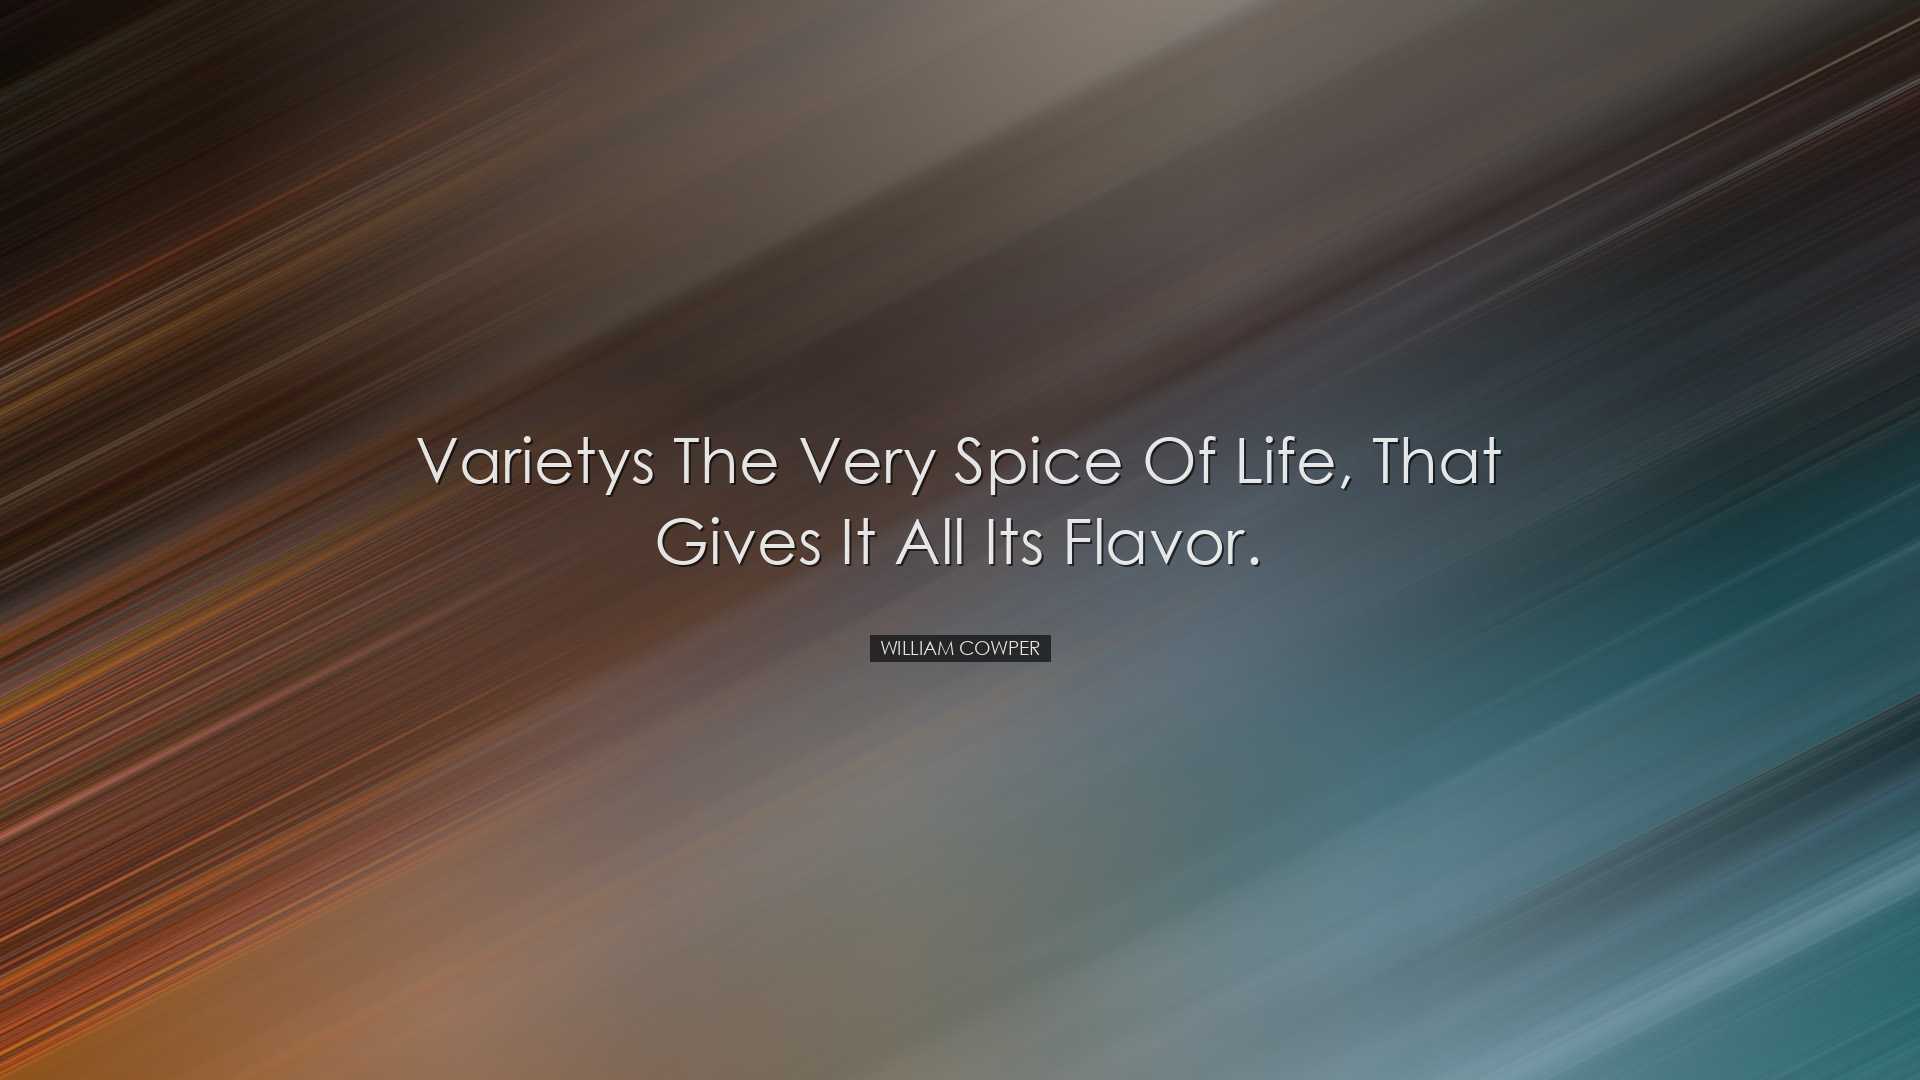 Varietys the very spice of life, That gives it all its flavor. - W